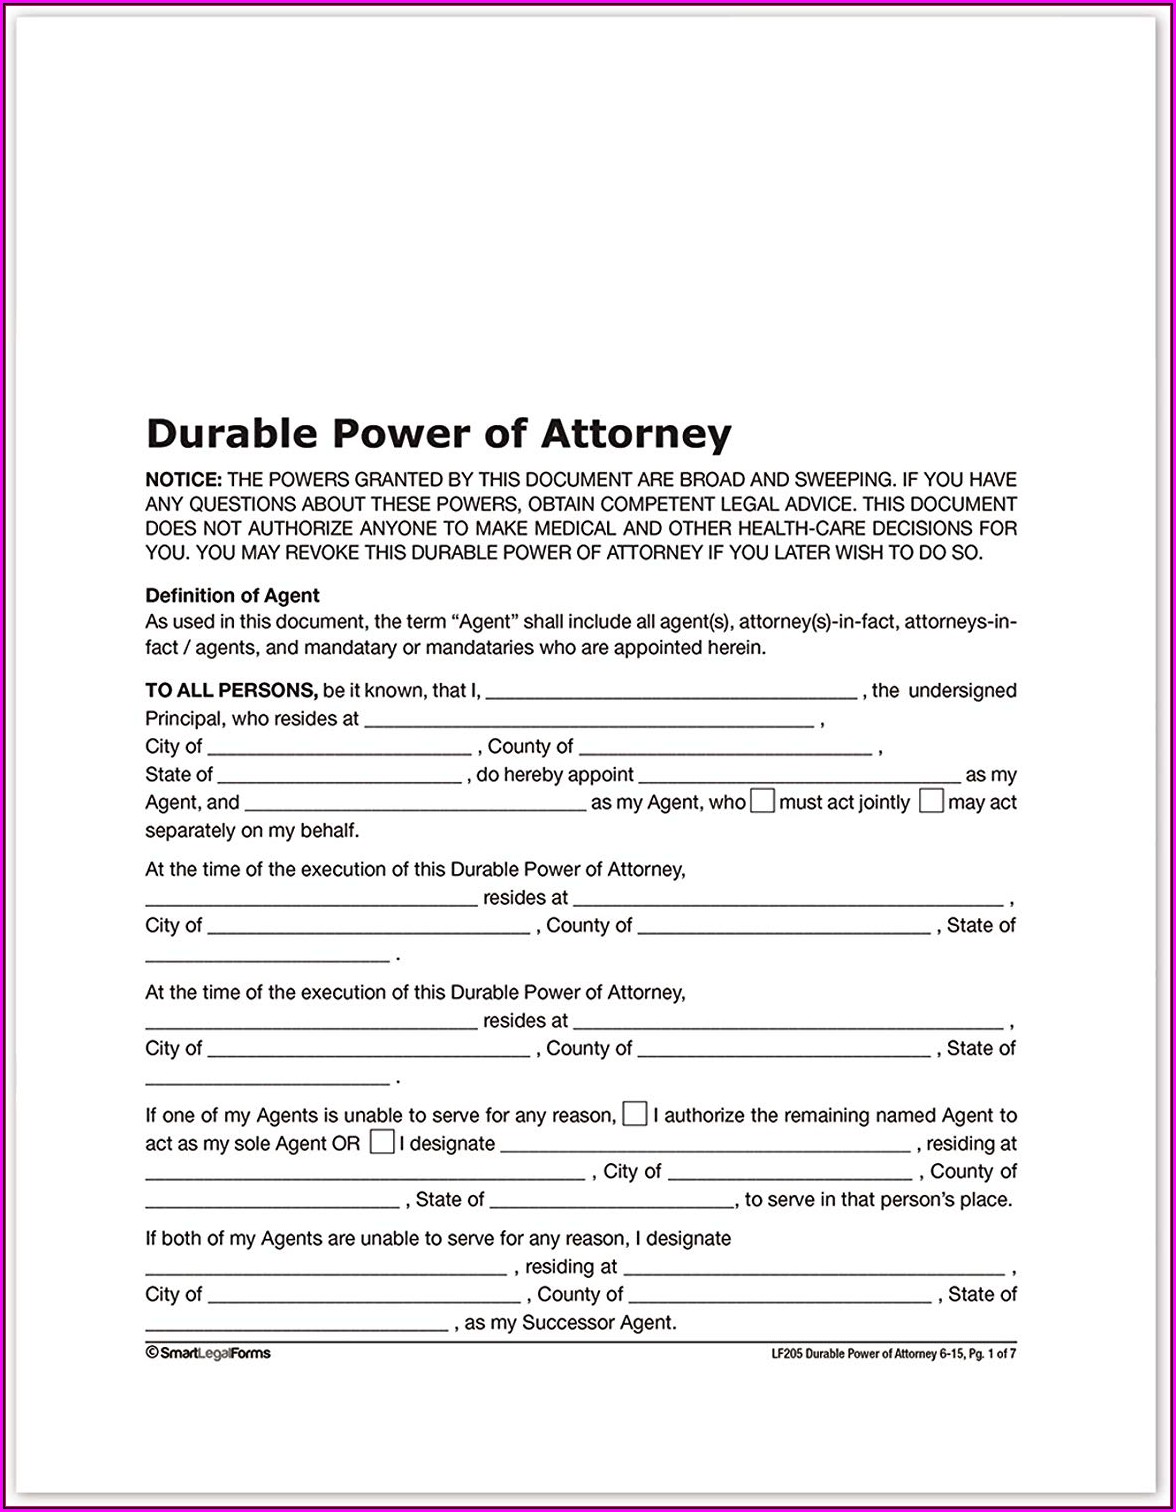 How To Complete A Durable Power Of Attorney Form